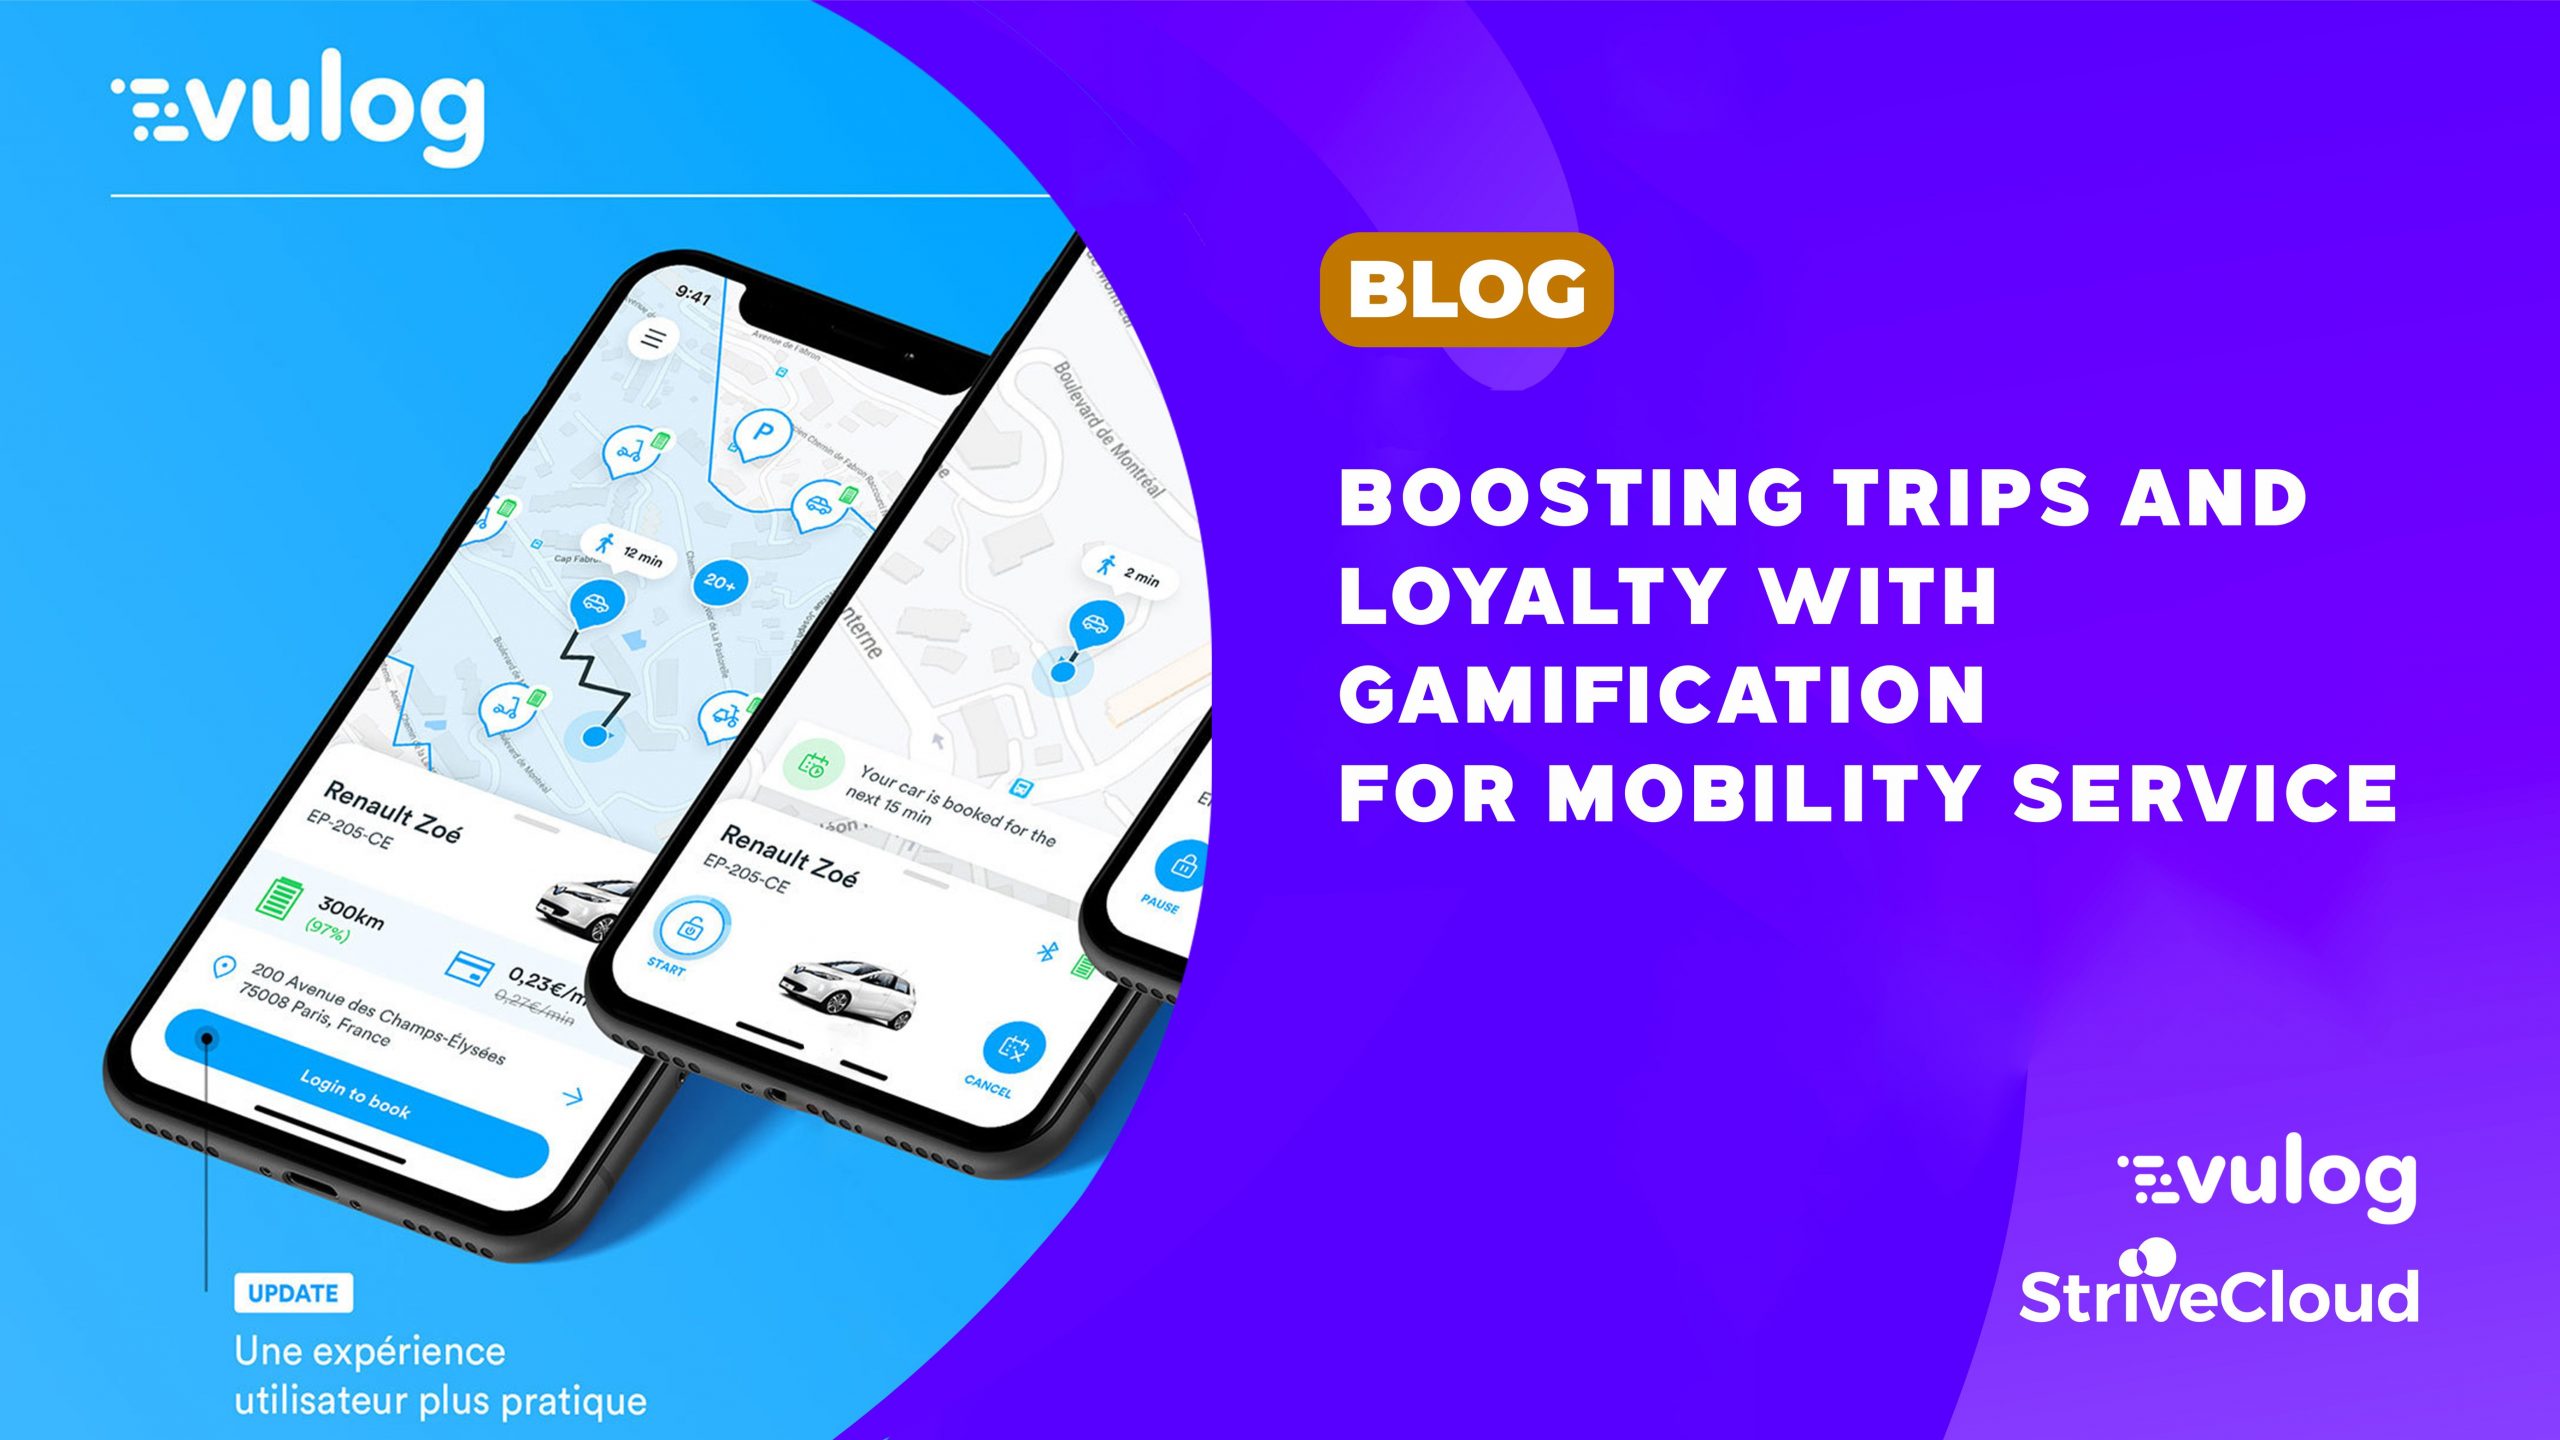 A cover image for Vulog's and Strivecloud's collaboration, title conveys how gamification can help a mobility service.